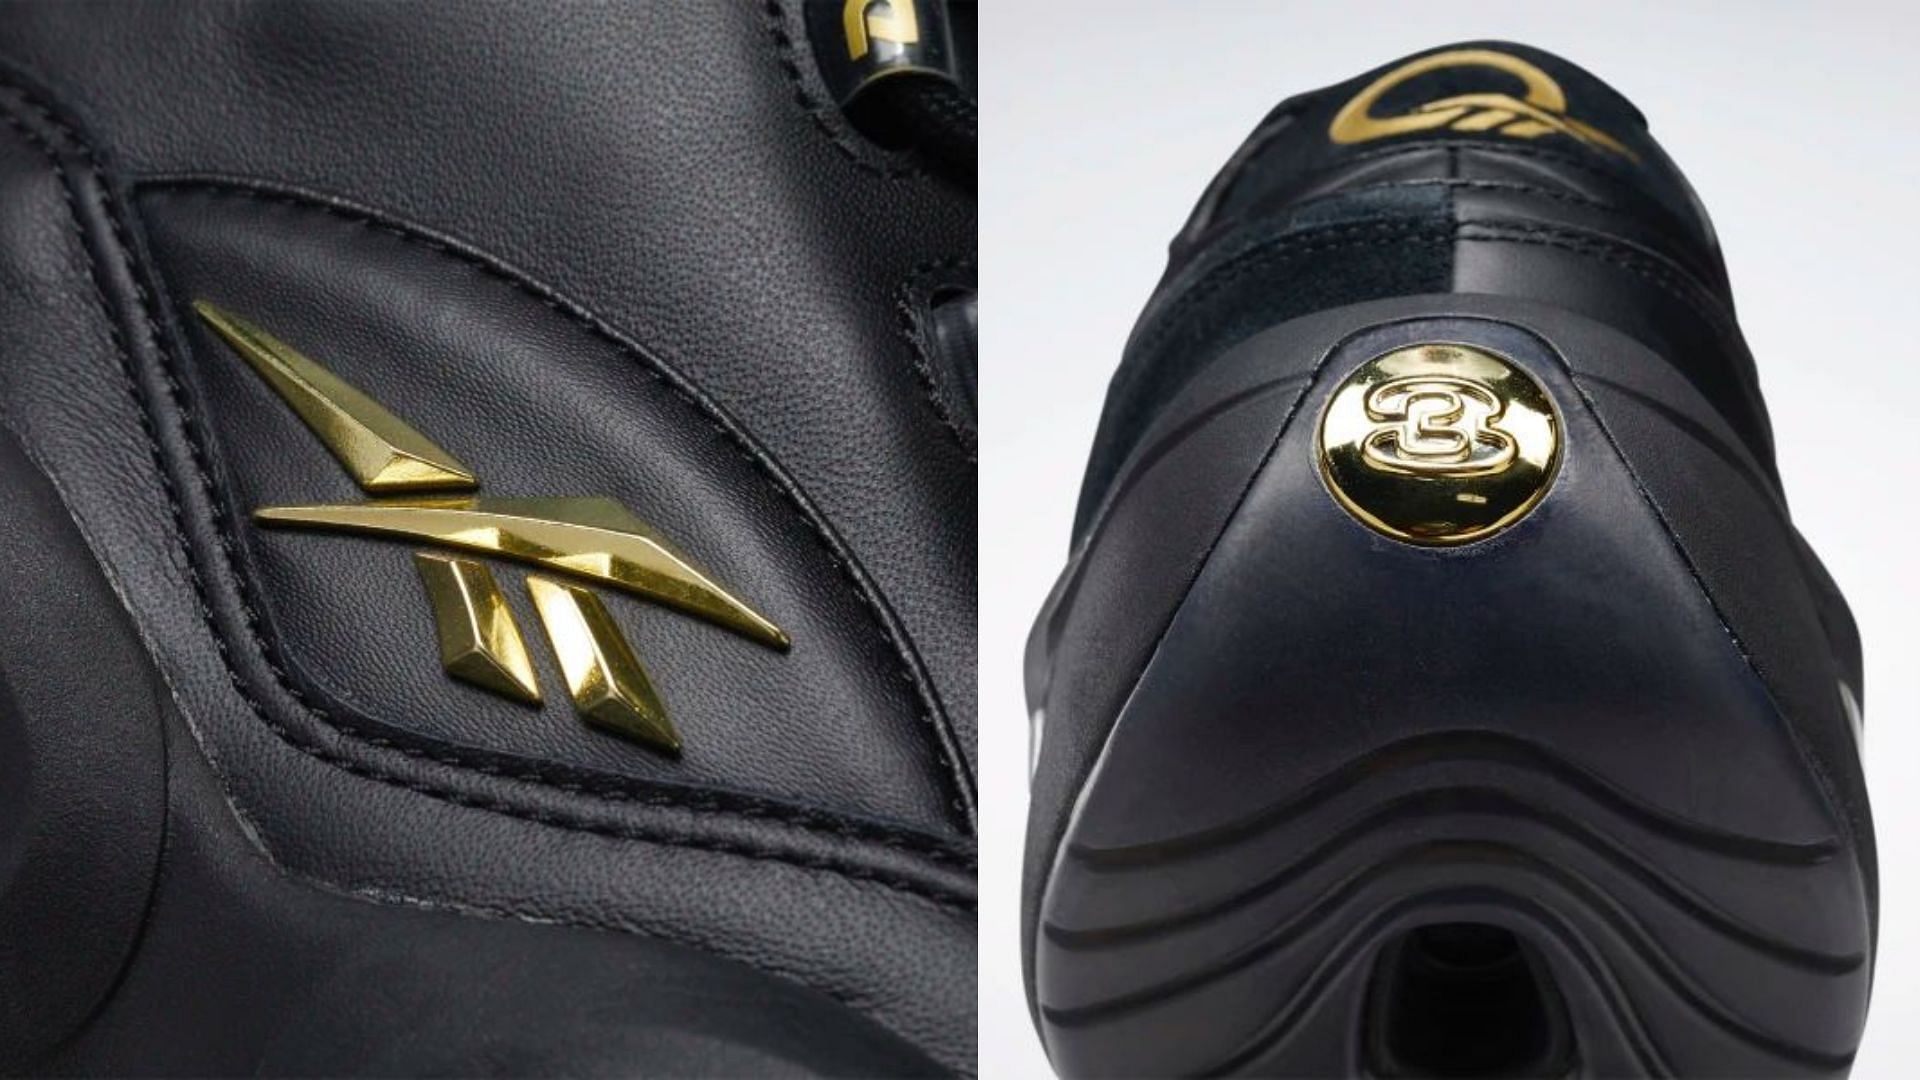 Take a closer look at the gold metallic accents of the looming sneaker (Image via Reebok)